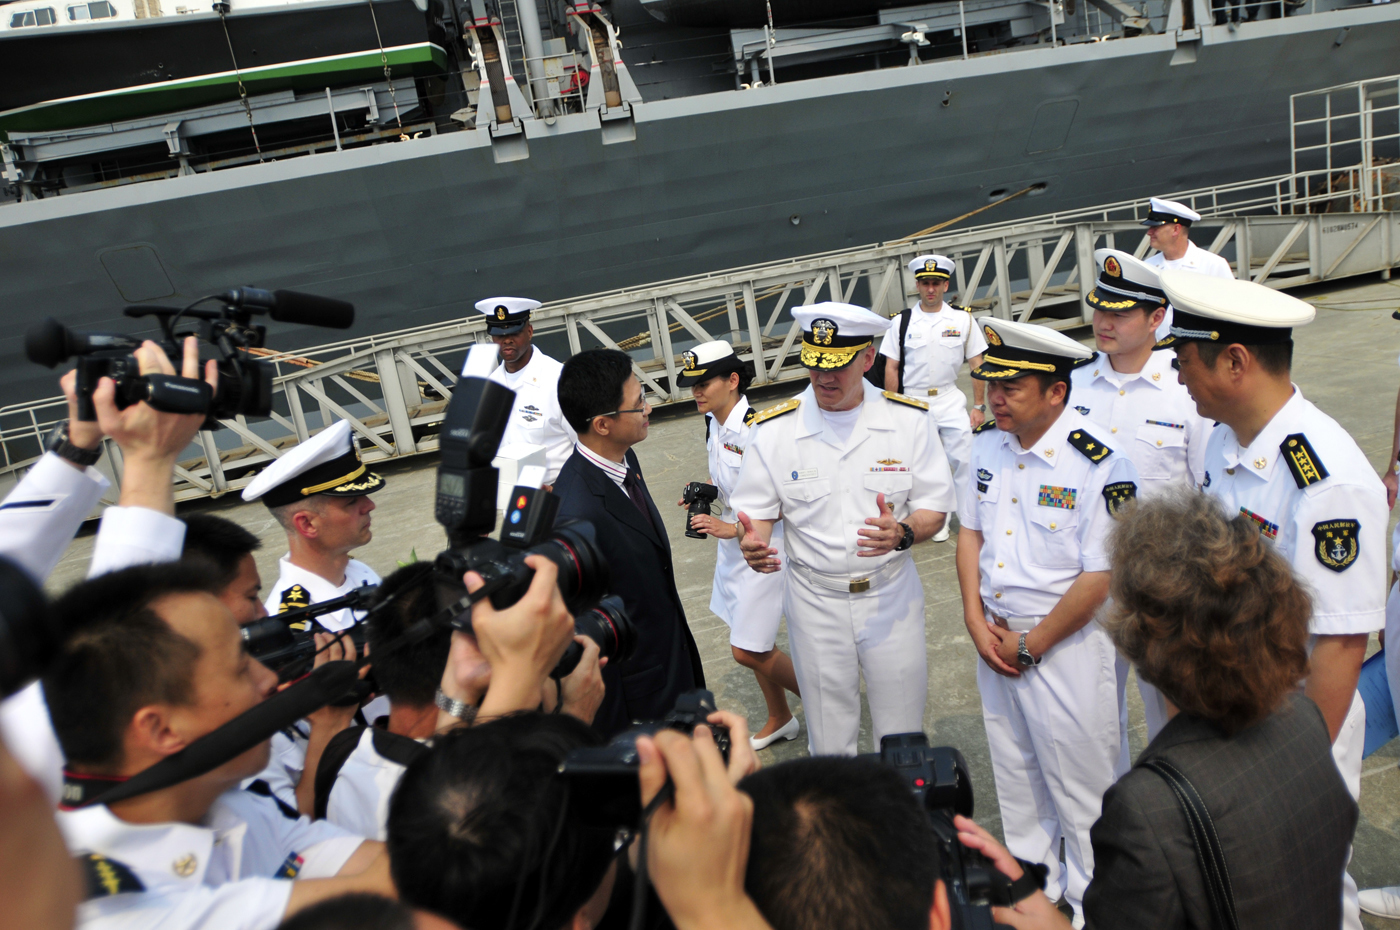 Chinese media document the arrival of Vice Adm. Robert Thomas, commander of U.S. 7th Fleet, during a welcome ceremony in Zhanjiang following the arrival of the U.S. 7th Fleet flagship USS Blue Ridge (LCC 19) on April 20, 2015. US Navy photo.